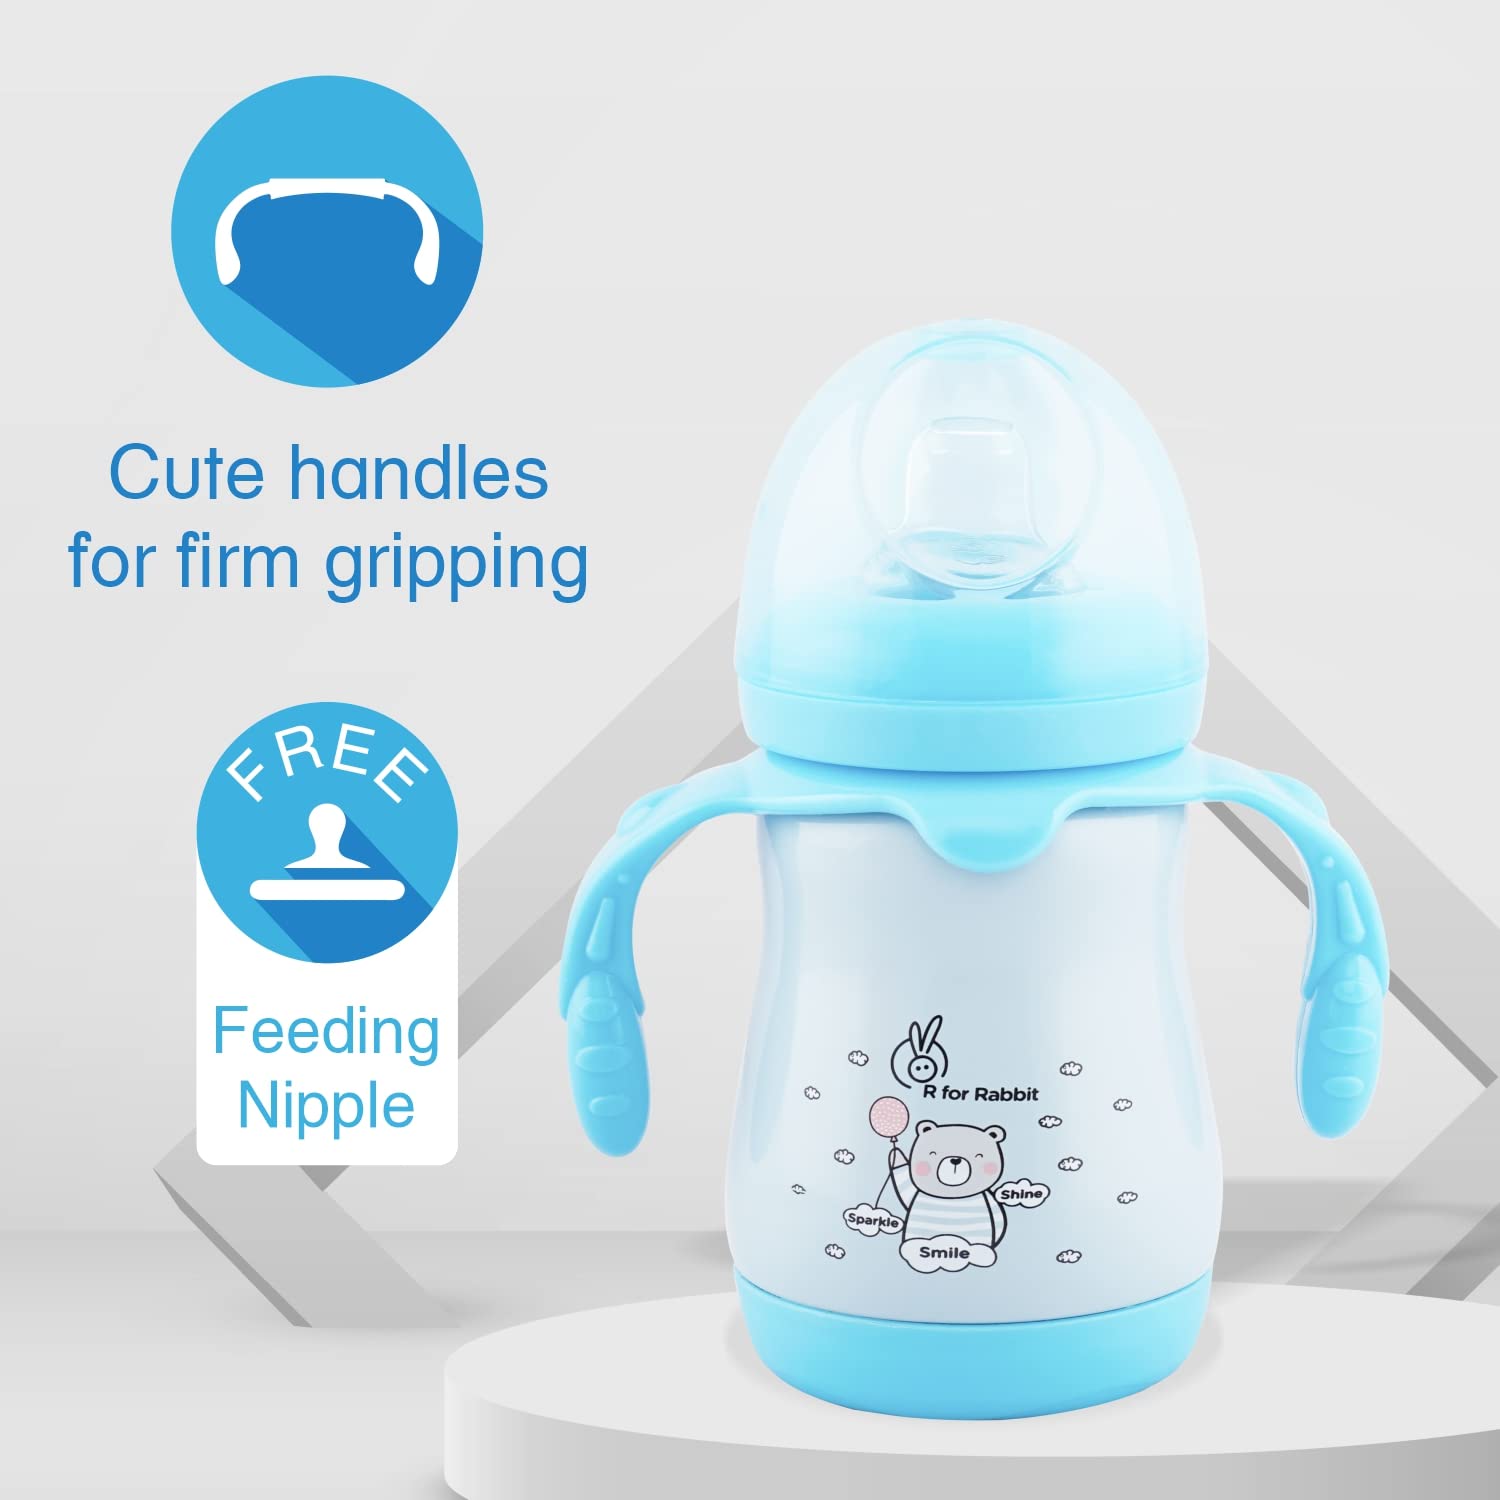 R FOR RABBIT Steebo Teddy Stainless Steel Feeding Bottle With Twin Handle - Blue, 210ml